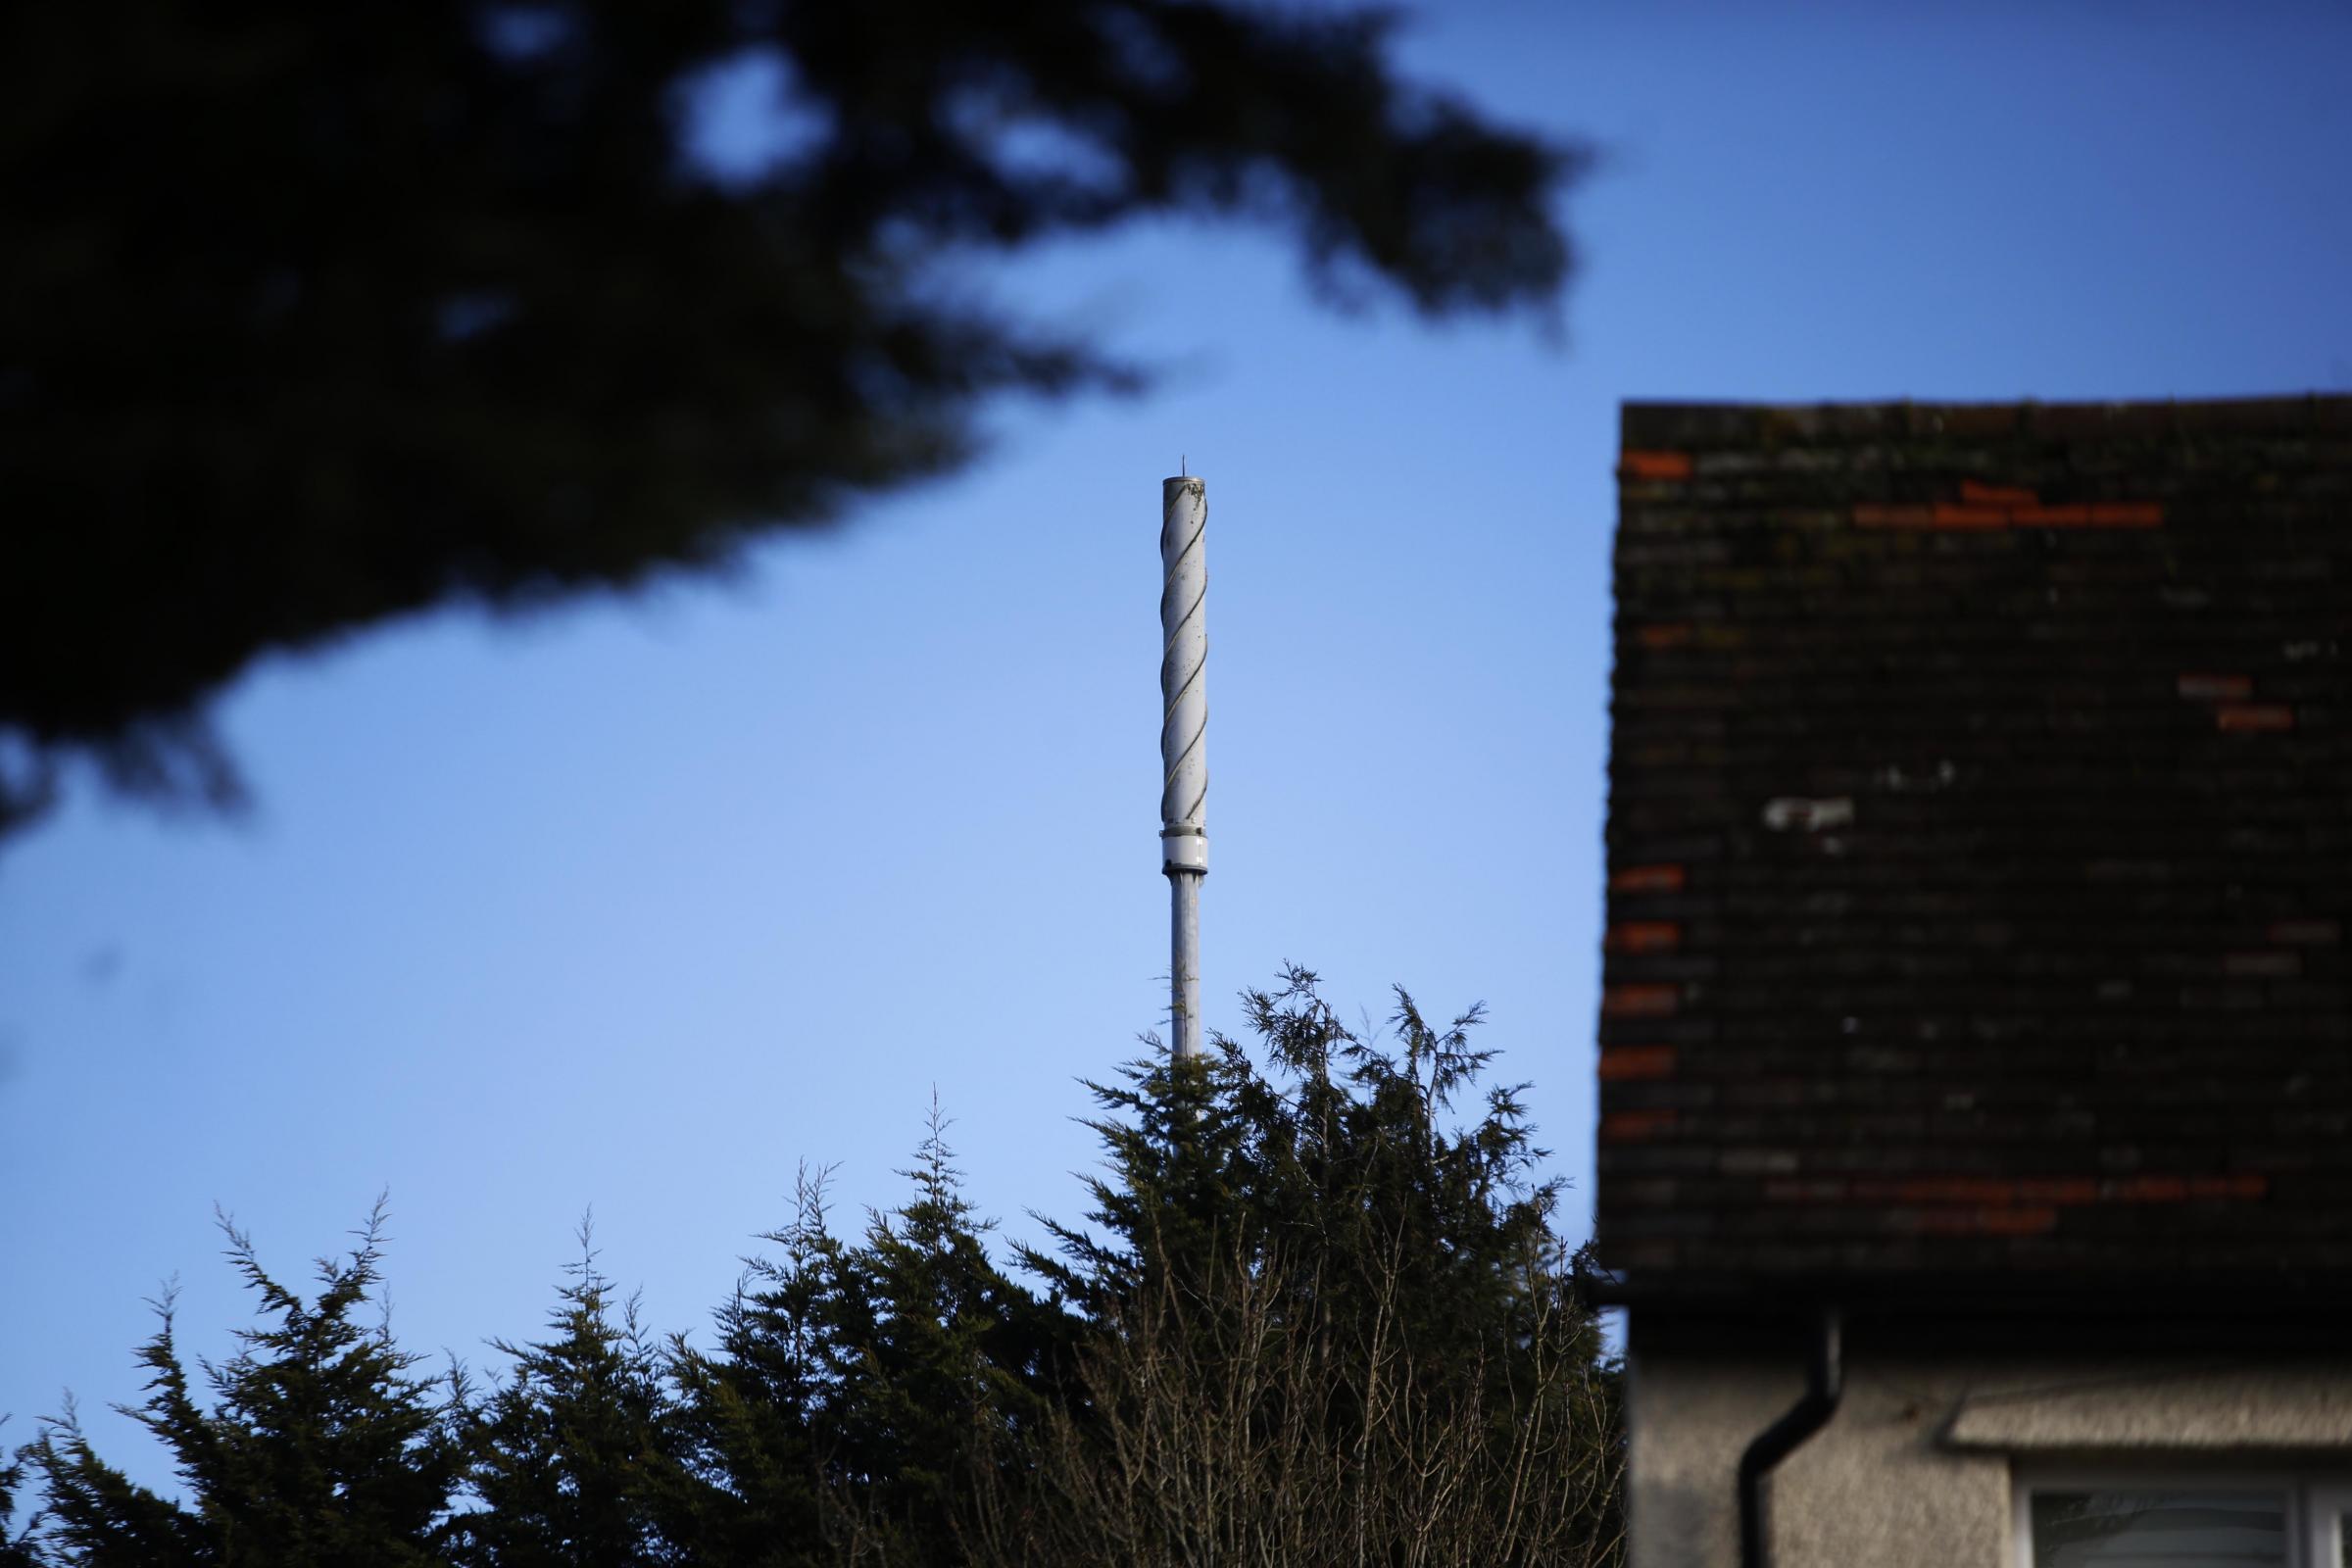 Ian Jackman and other Eynsham residents are disappointed by plans to build a 5G mast near their homes. Picture: Ed Nix